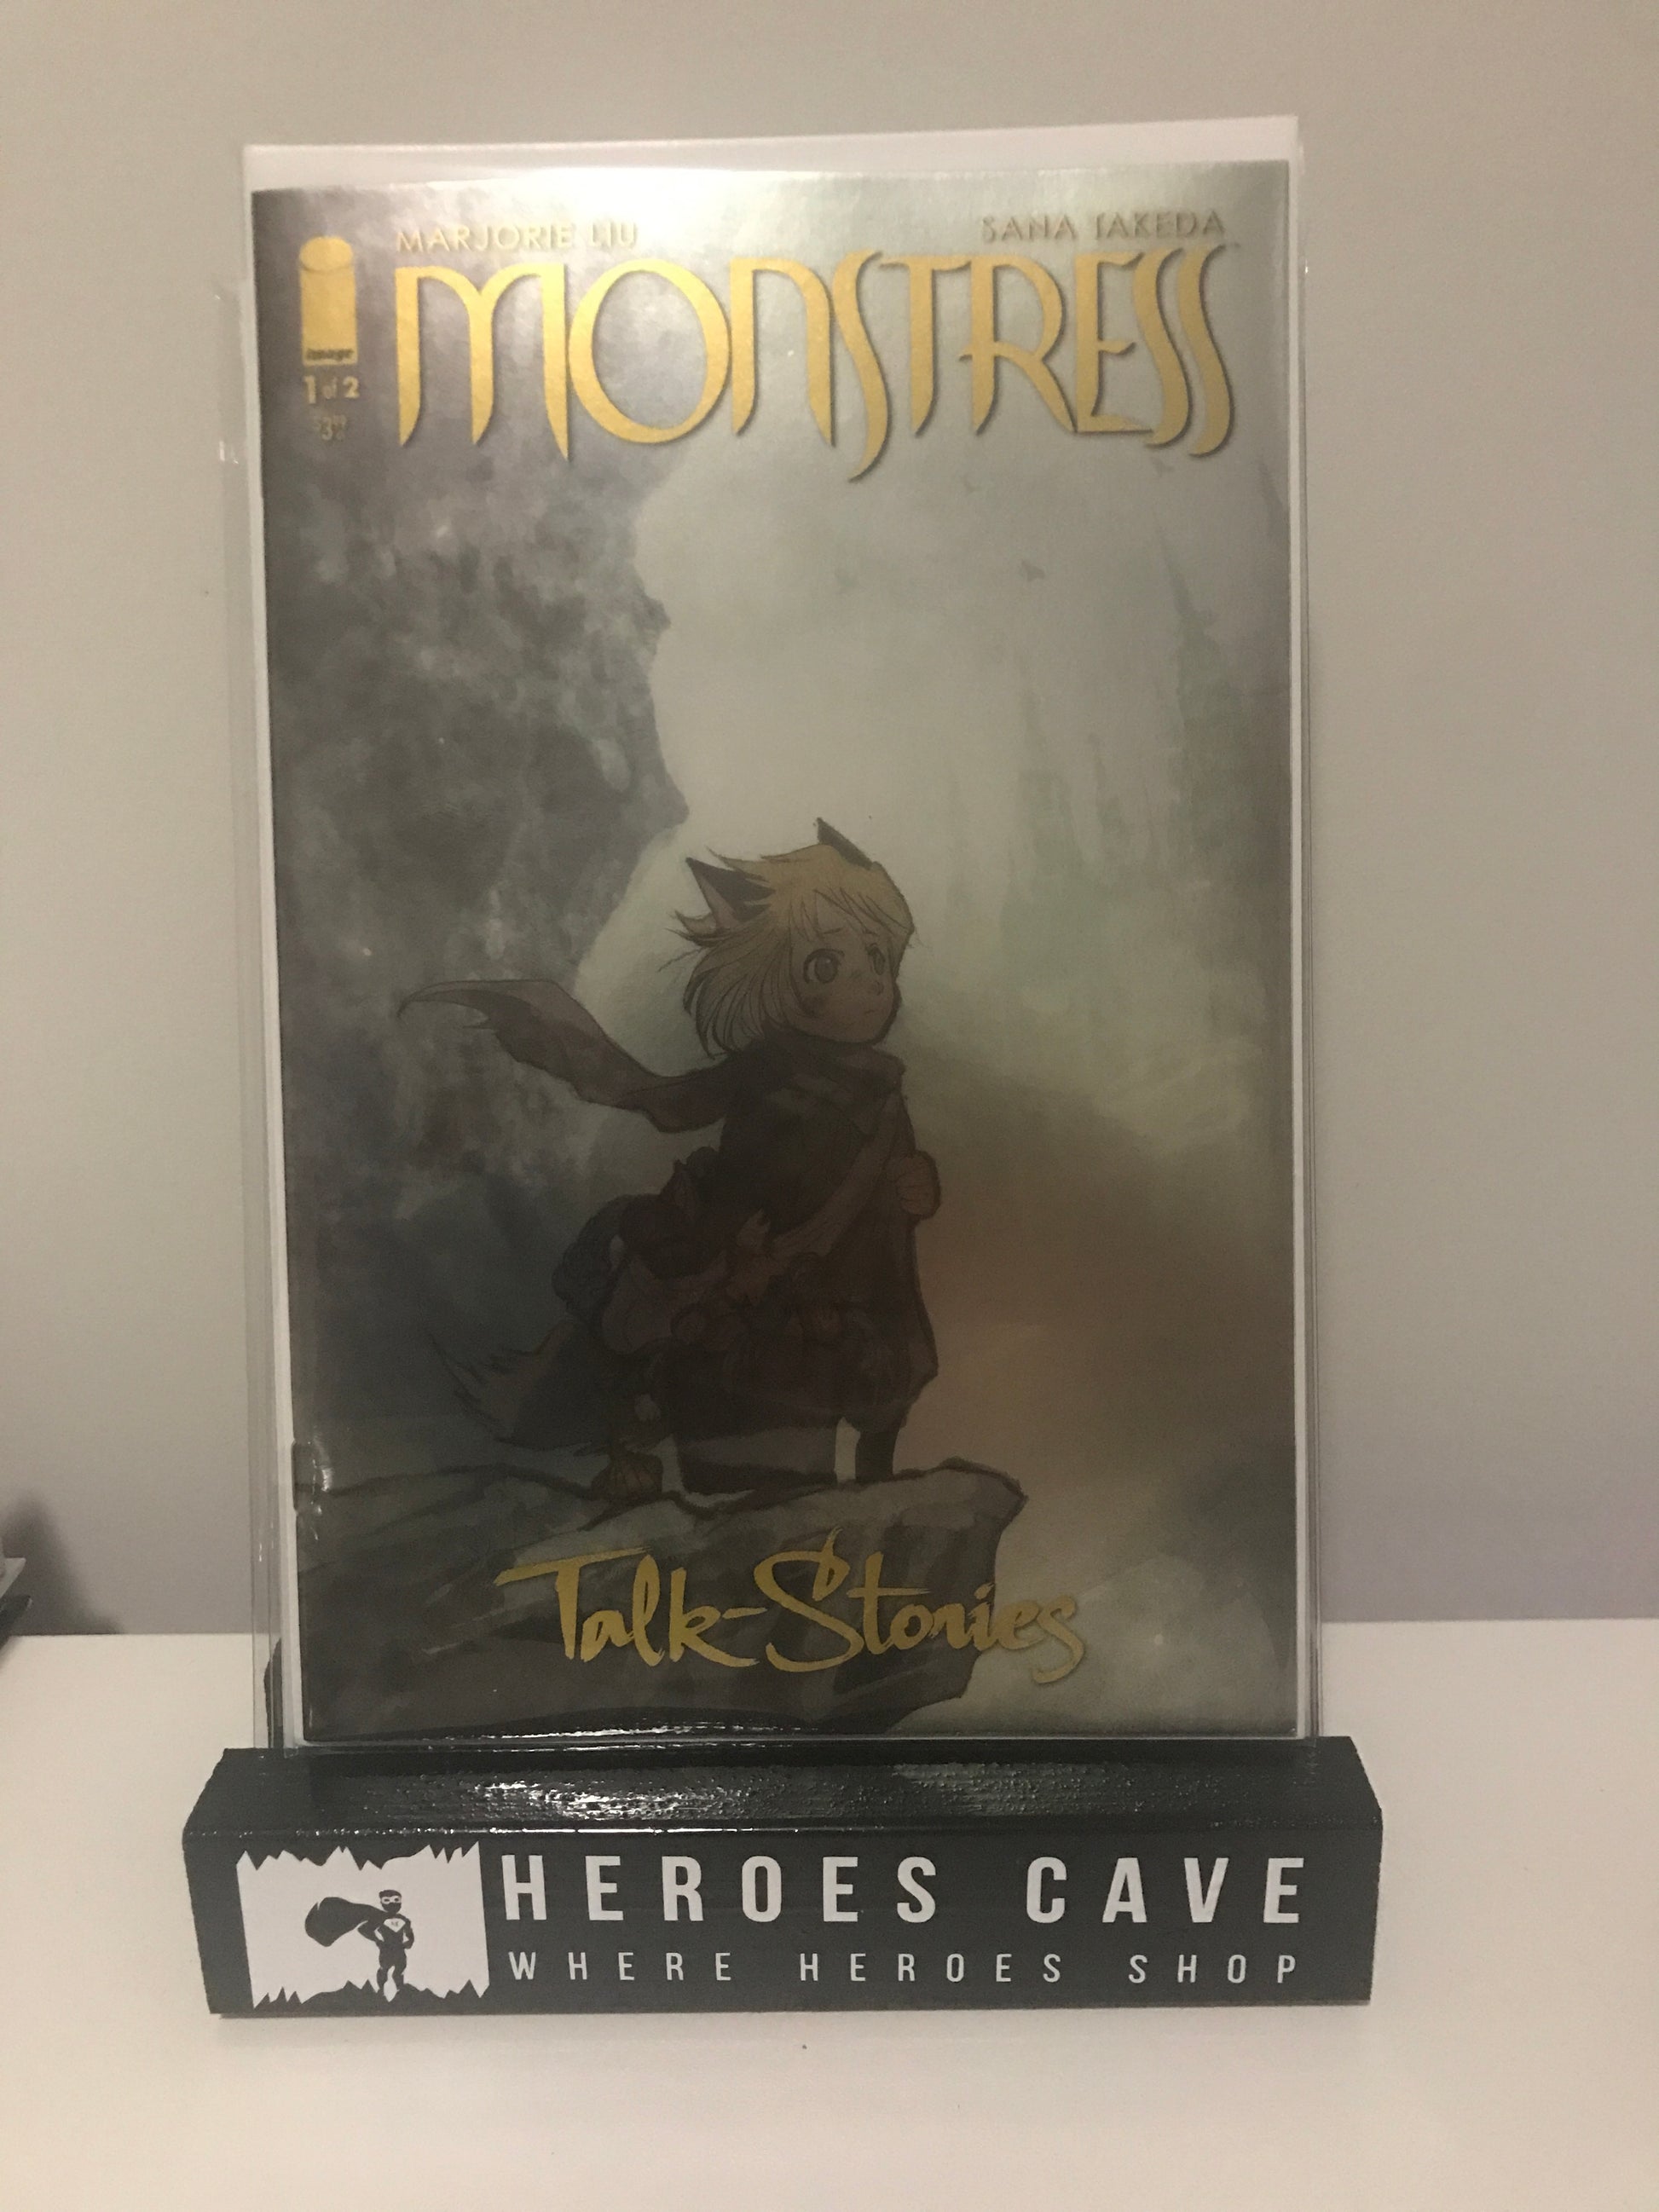 LCSD Monstress Talk-Stories 1 - Heroes Cave